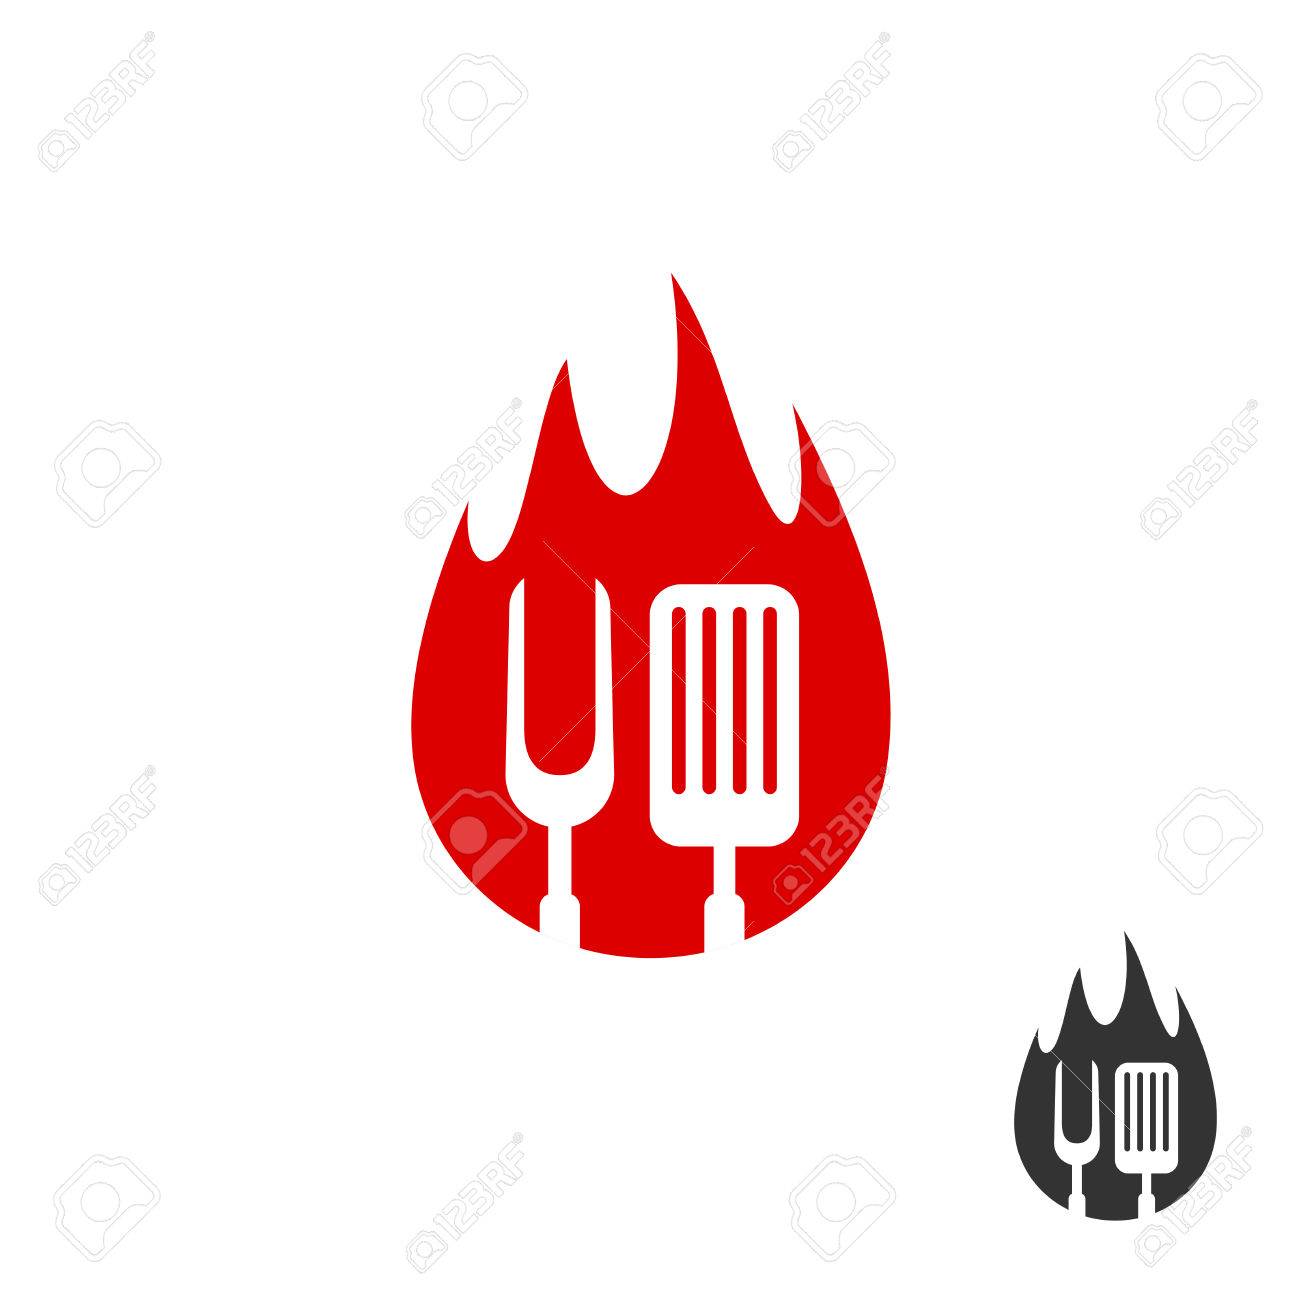 Activities, bbq, free, grill, hobby, holiday, leisure icon | Icon 